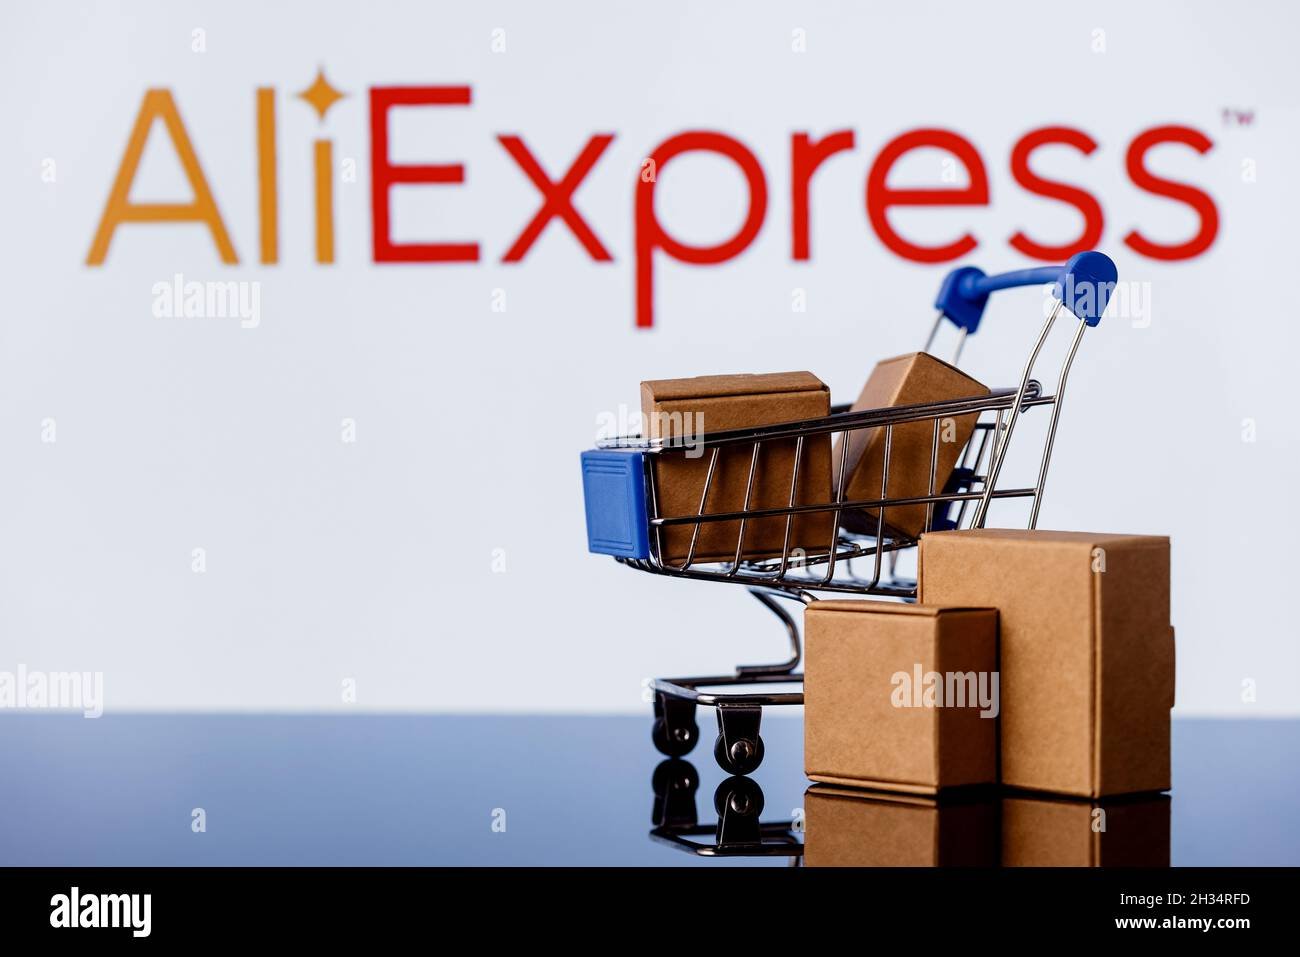 aliexpress-is-an-chinese-online-retail-service-shopping-cart-with-parcels-on-the-background-of-the-aliexpress-logo-2H34RFD